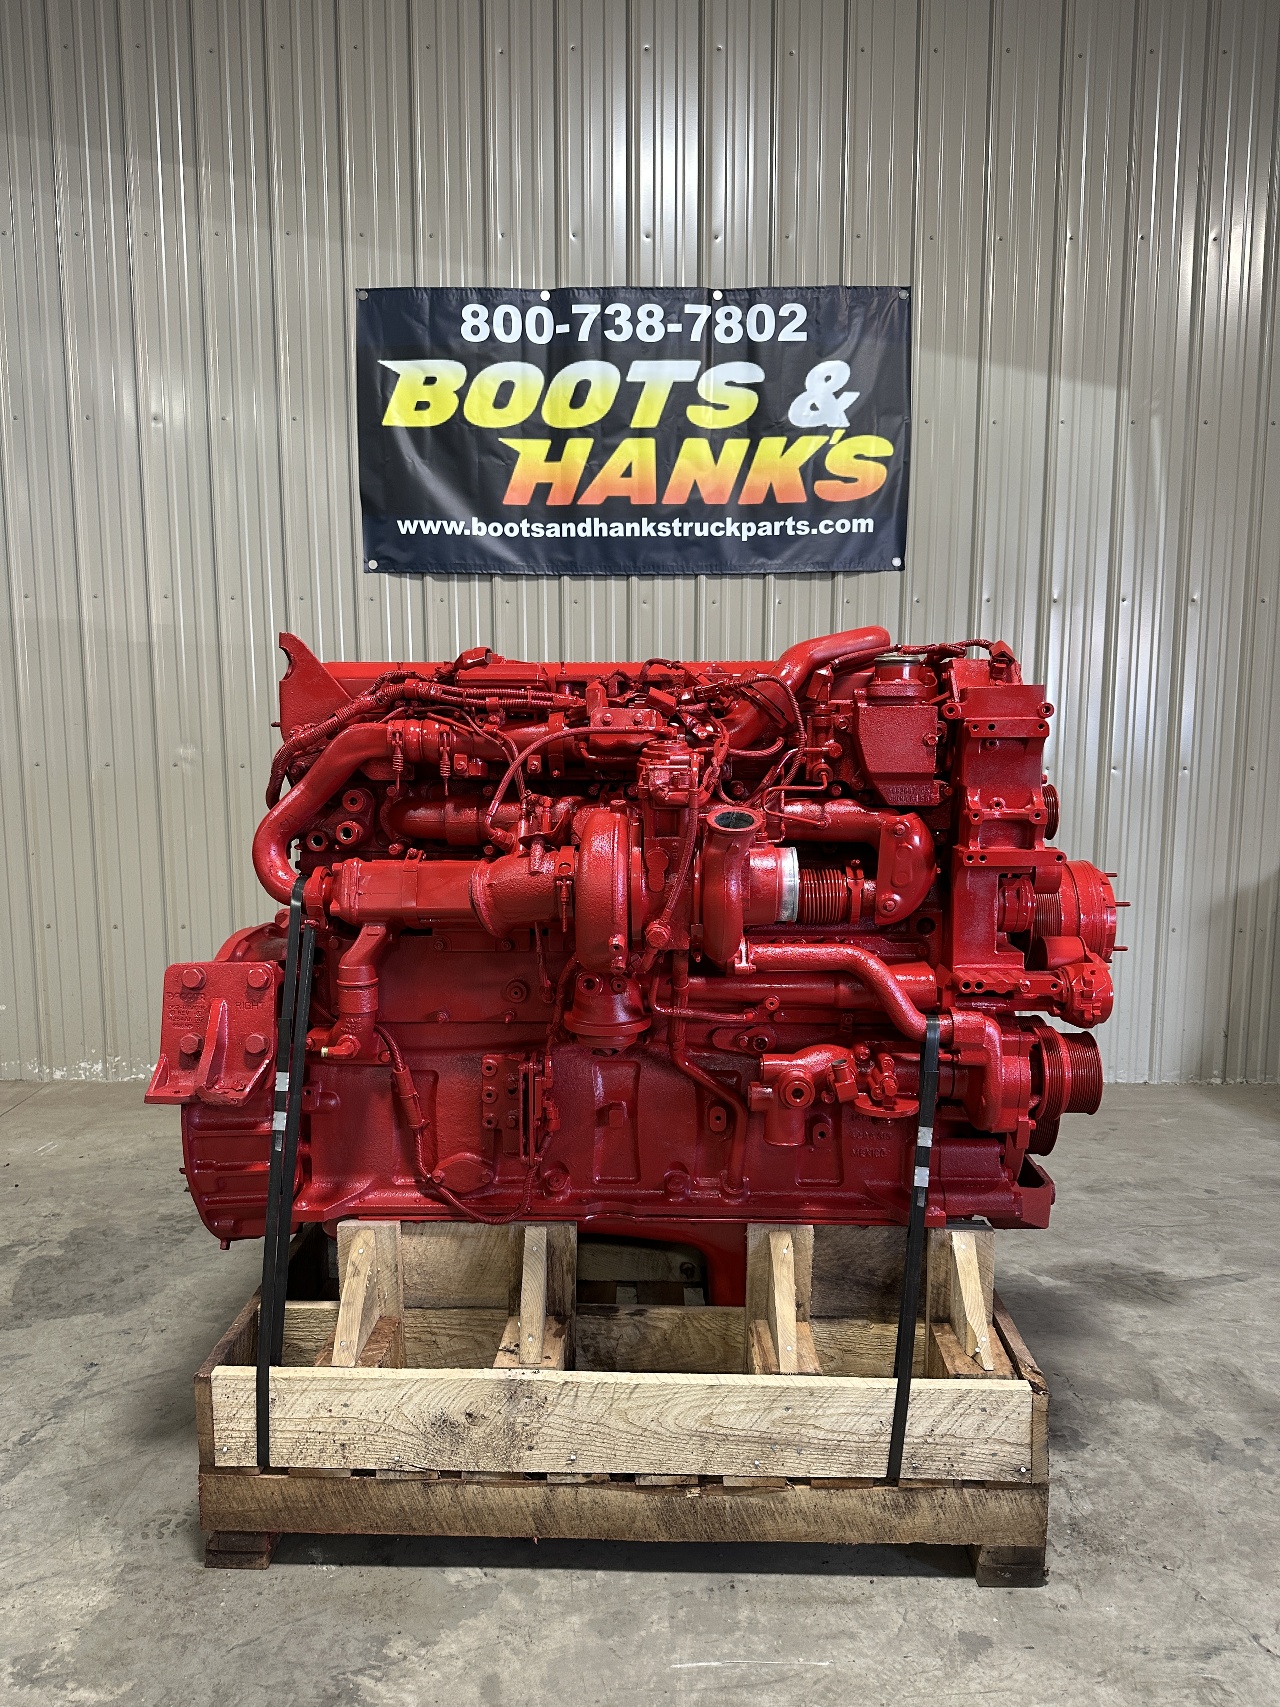 USED 2012 CUMMINS ISX15 COMPLETE ENGINE TRUCK PARTS #2004